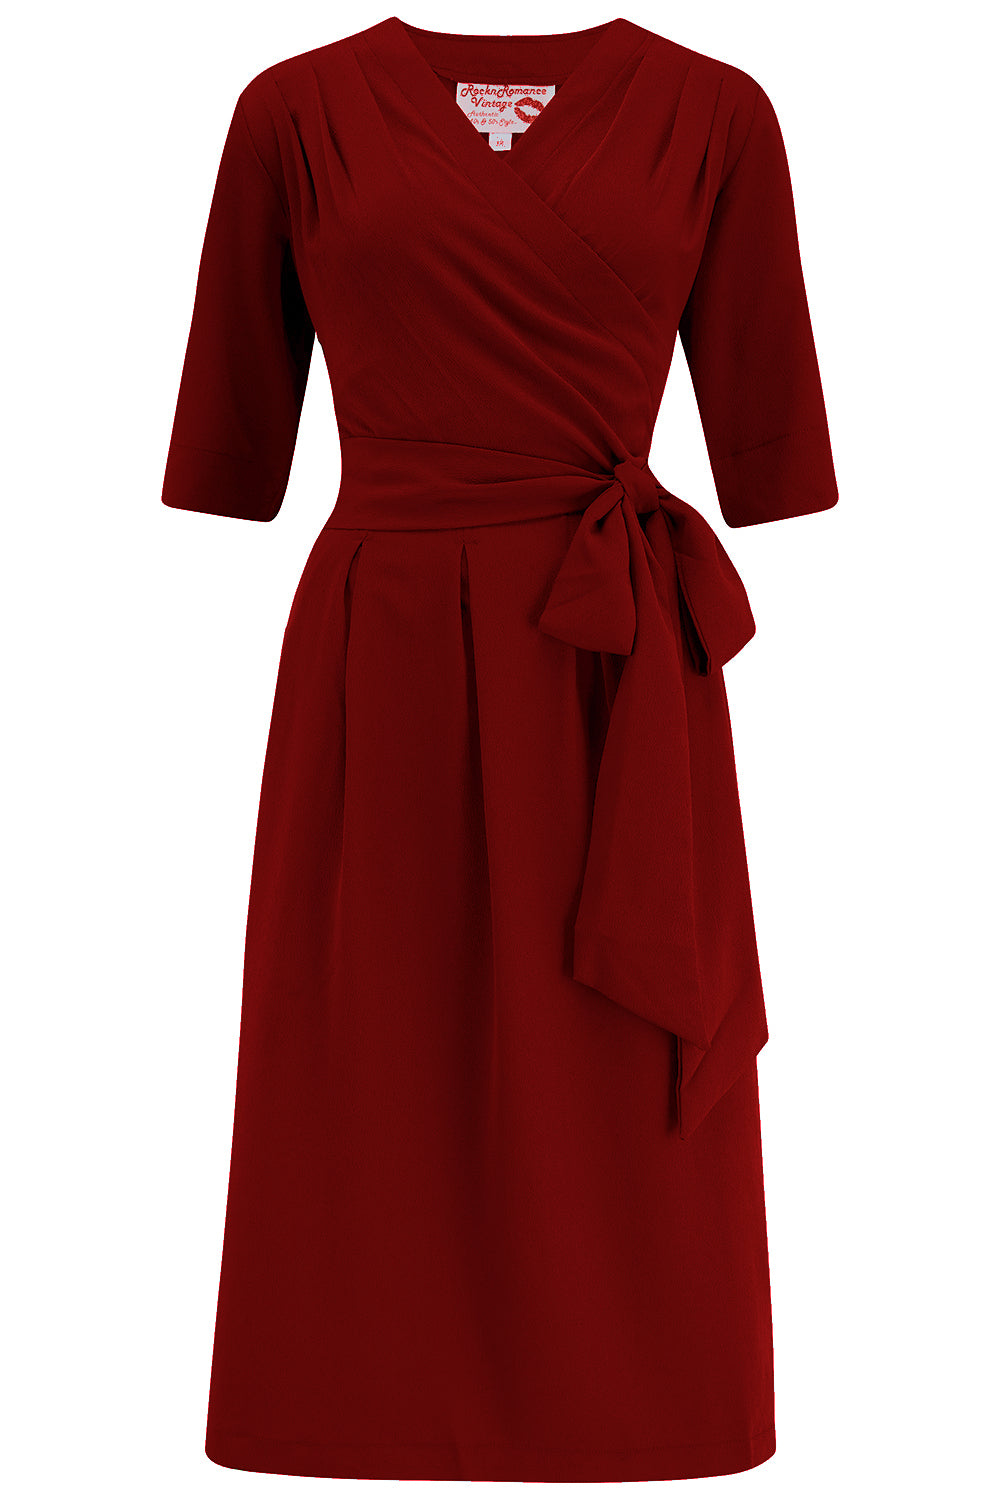 1950s Dresses, 50s Dresses | 1950s Style Dresses The Vivien Full Wrap Dress in Wine True 1940s To Early 1950s Style £49.95 AT vintagedancer.com